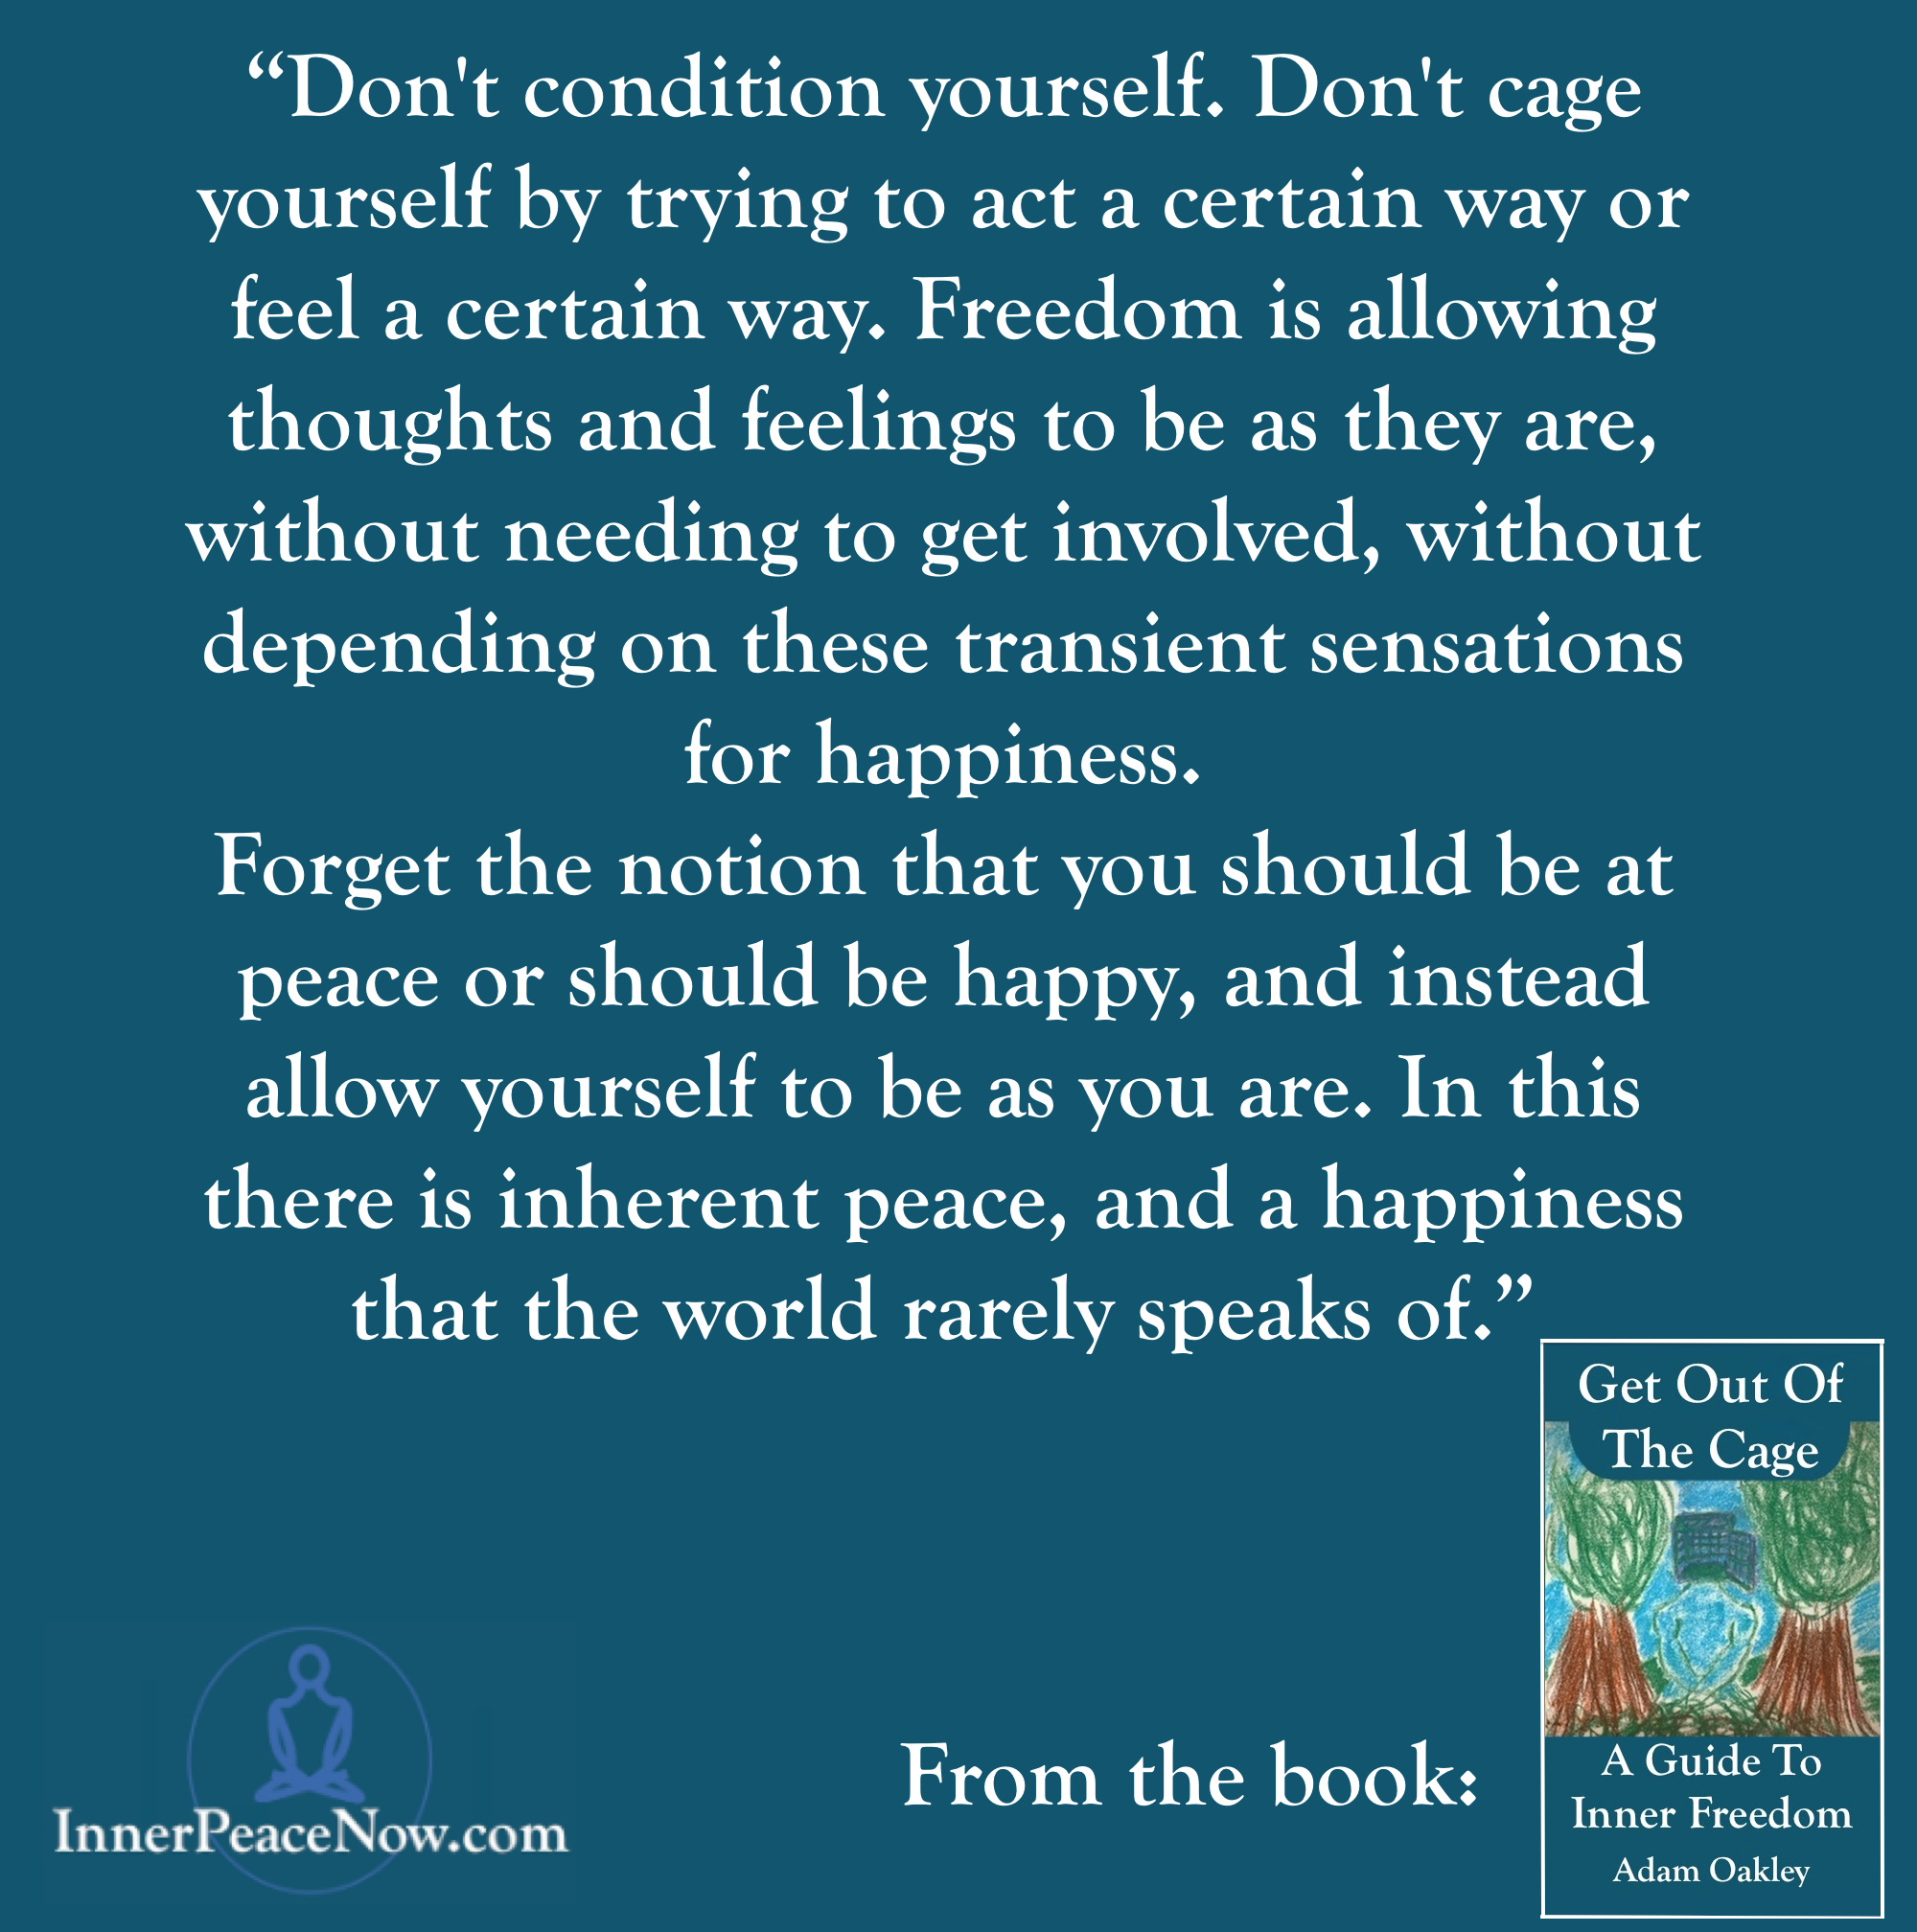 Don't Condition Yourself - Get Out Of The Cage Quote